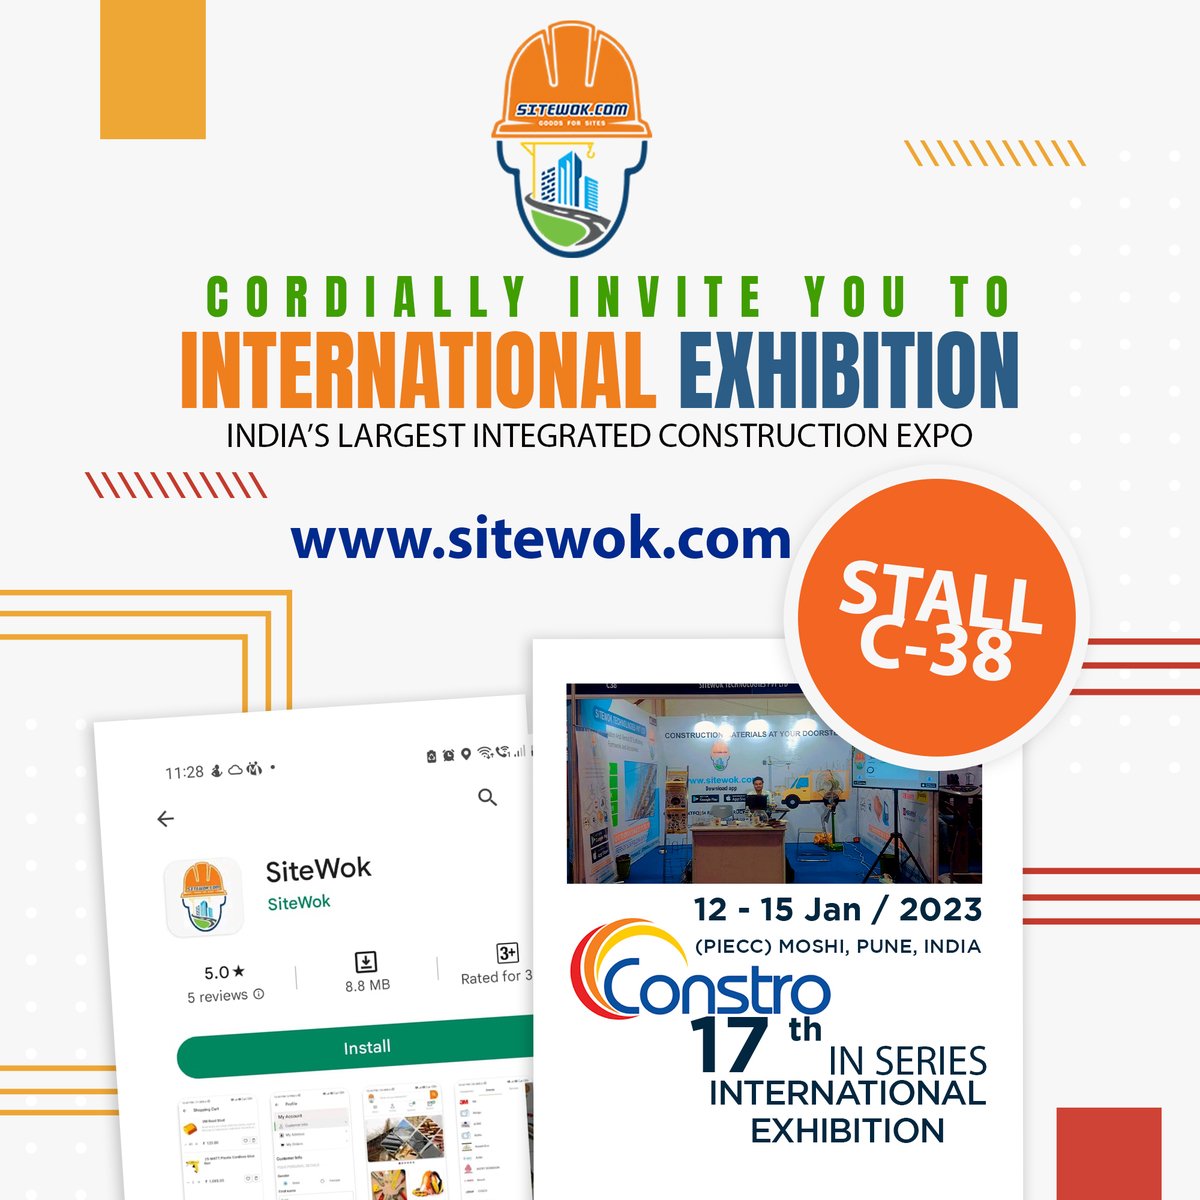 Cordially Invite You Too 17th India's Largest Construction Expo 
Visit Our Stall - C38
(PIECC) Moshi,Pune
#constro #constroindia #constro2023 #Constructionexhibition #internationalexibition #expo #sitework #sitewok #buildingmaterialsupplier #constructionmaterialsupplier